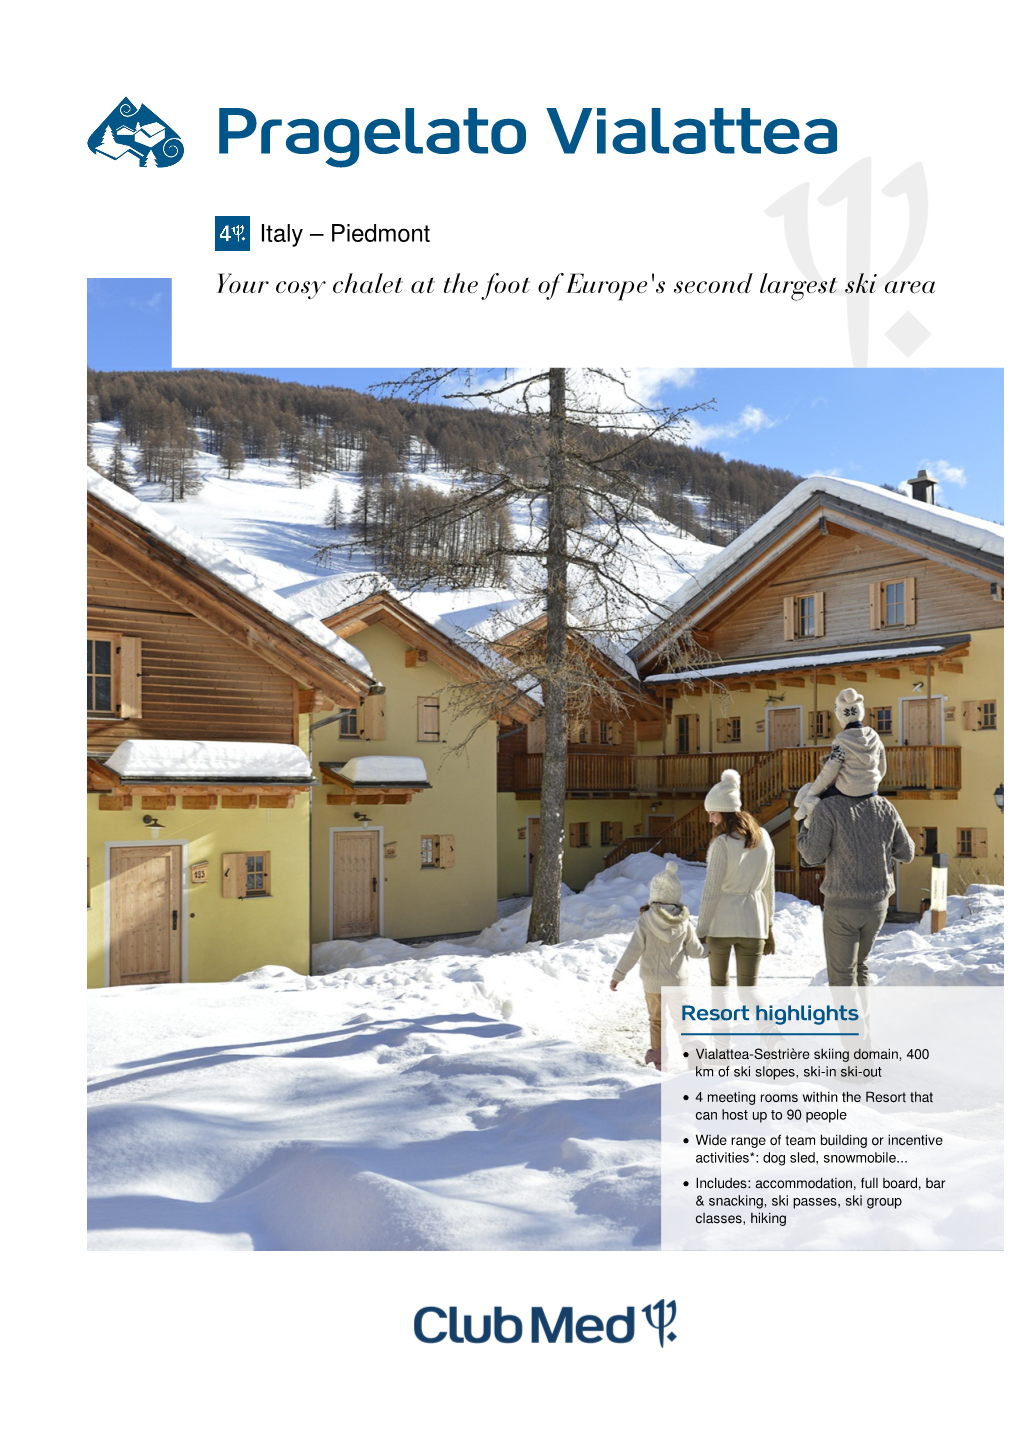 Your Cosy Chalet at the Foot of Europe's Second Largest Ski Area